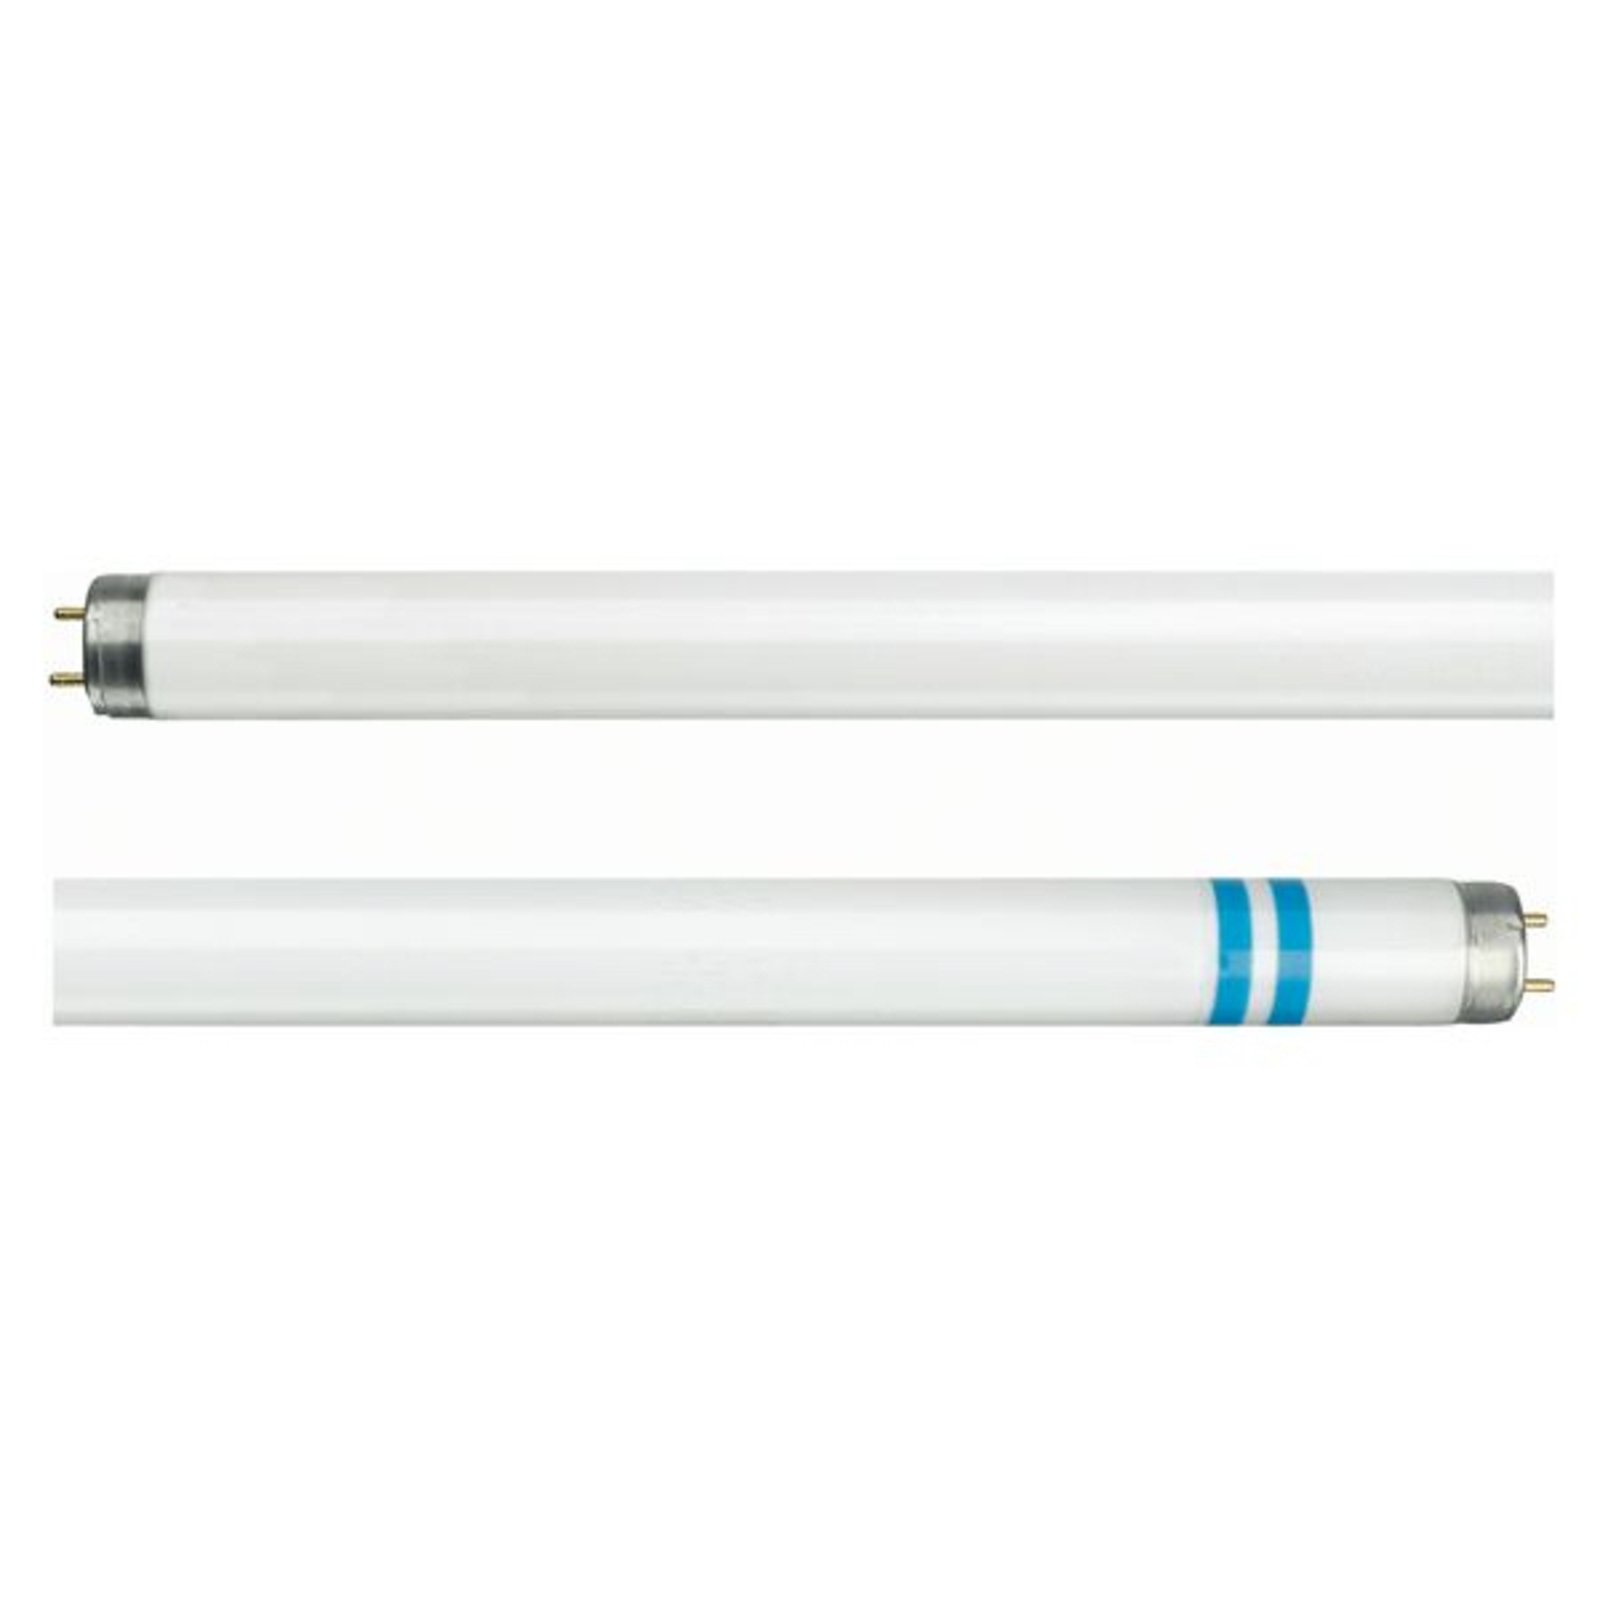 G13 T8 fluorescent bulb with shatter protection